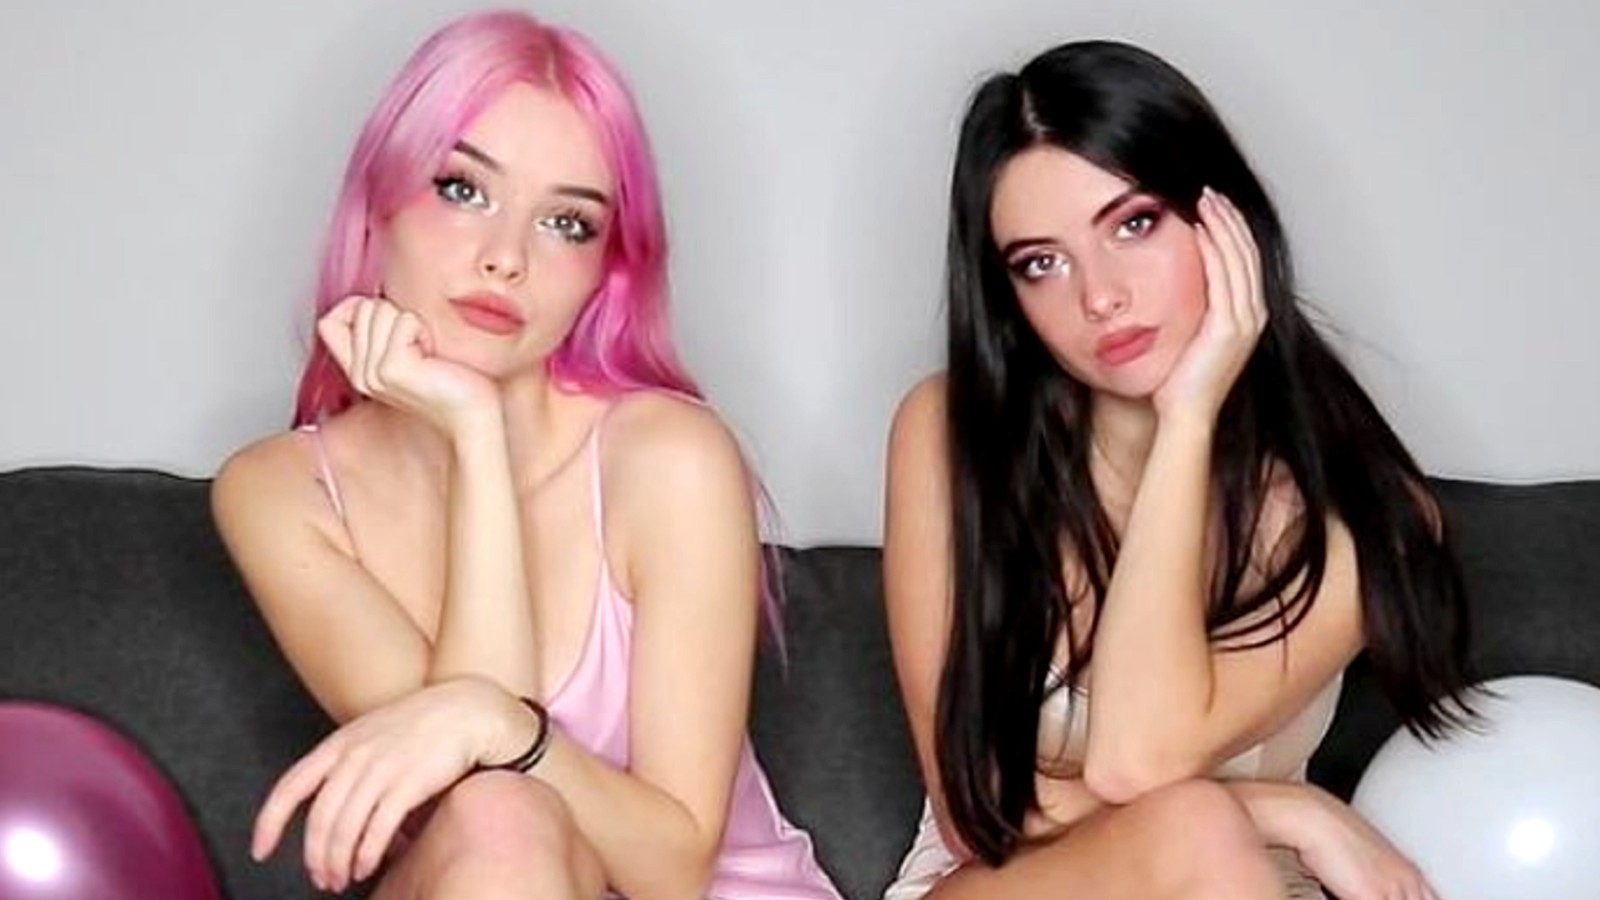 Who are Julia & Lauren Burch? Twin sisters blowing up on TikTok and Twitch  - Dexerto